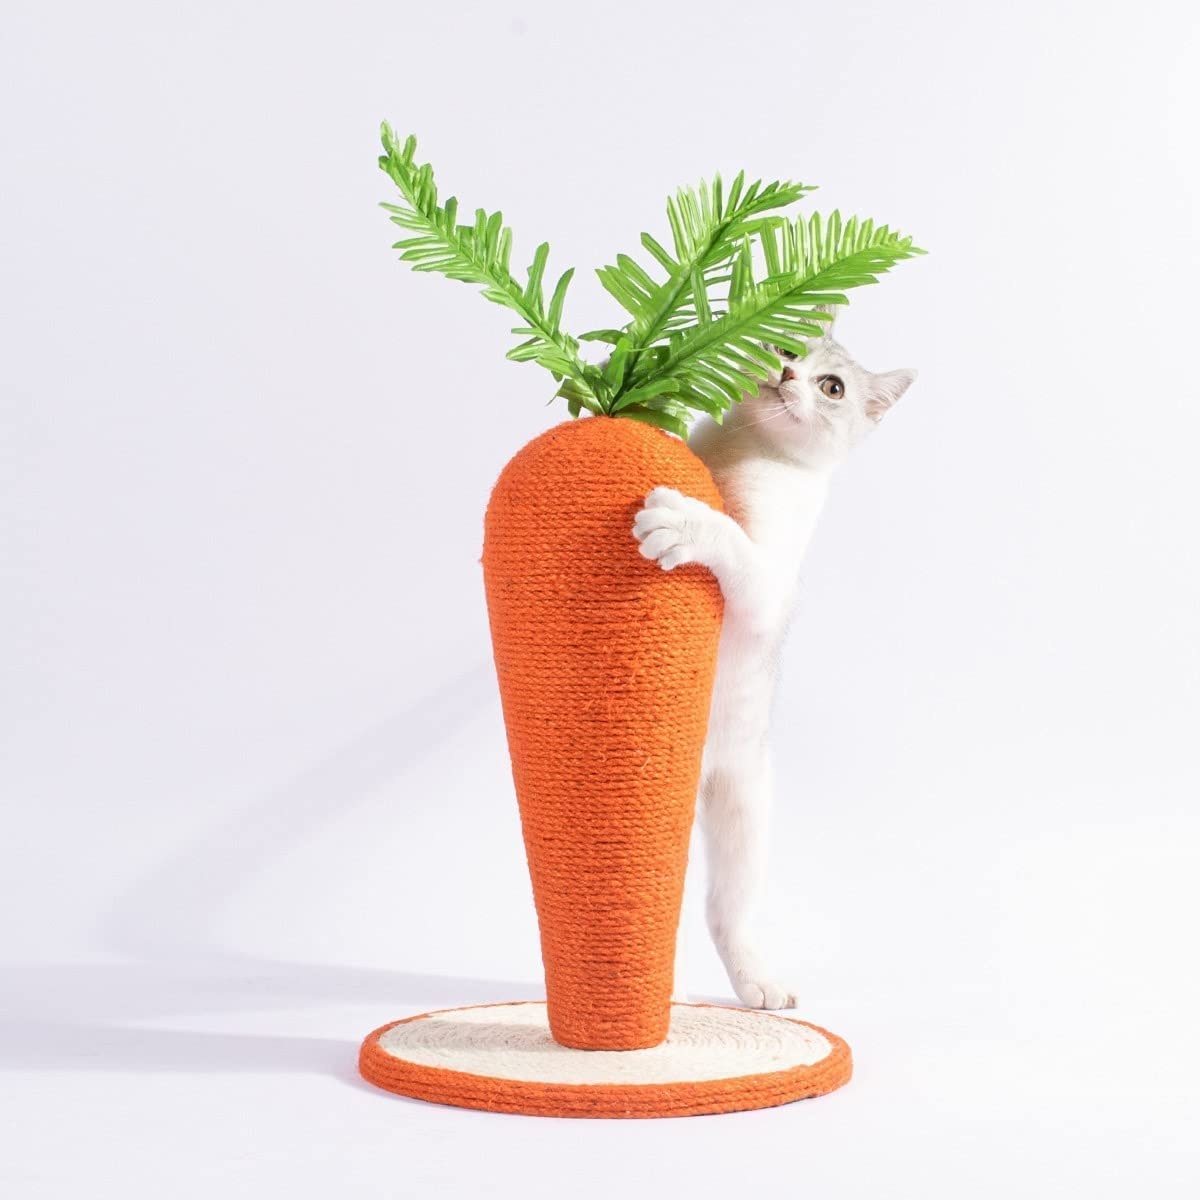 cat using scratcher that looks like a carrot